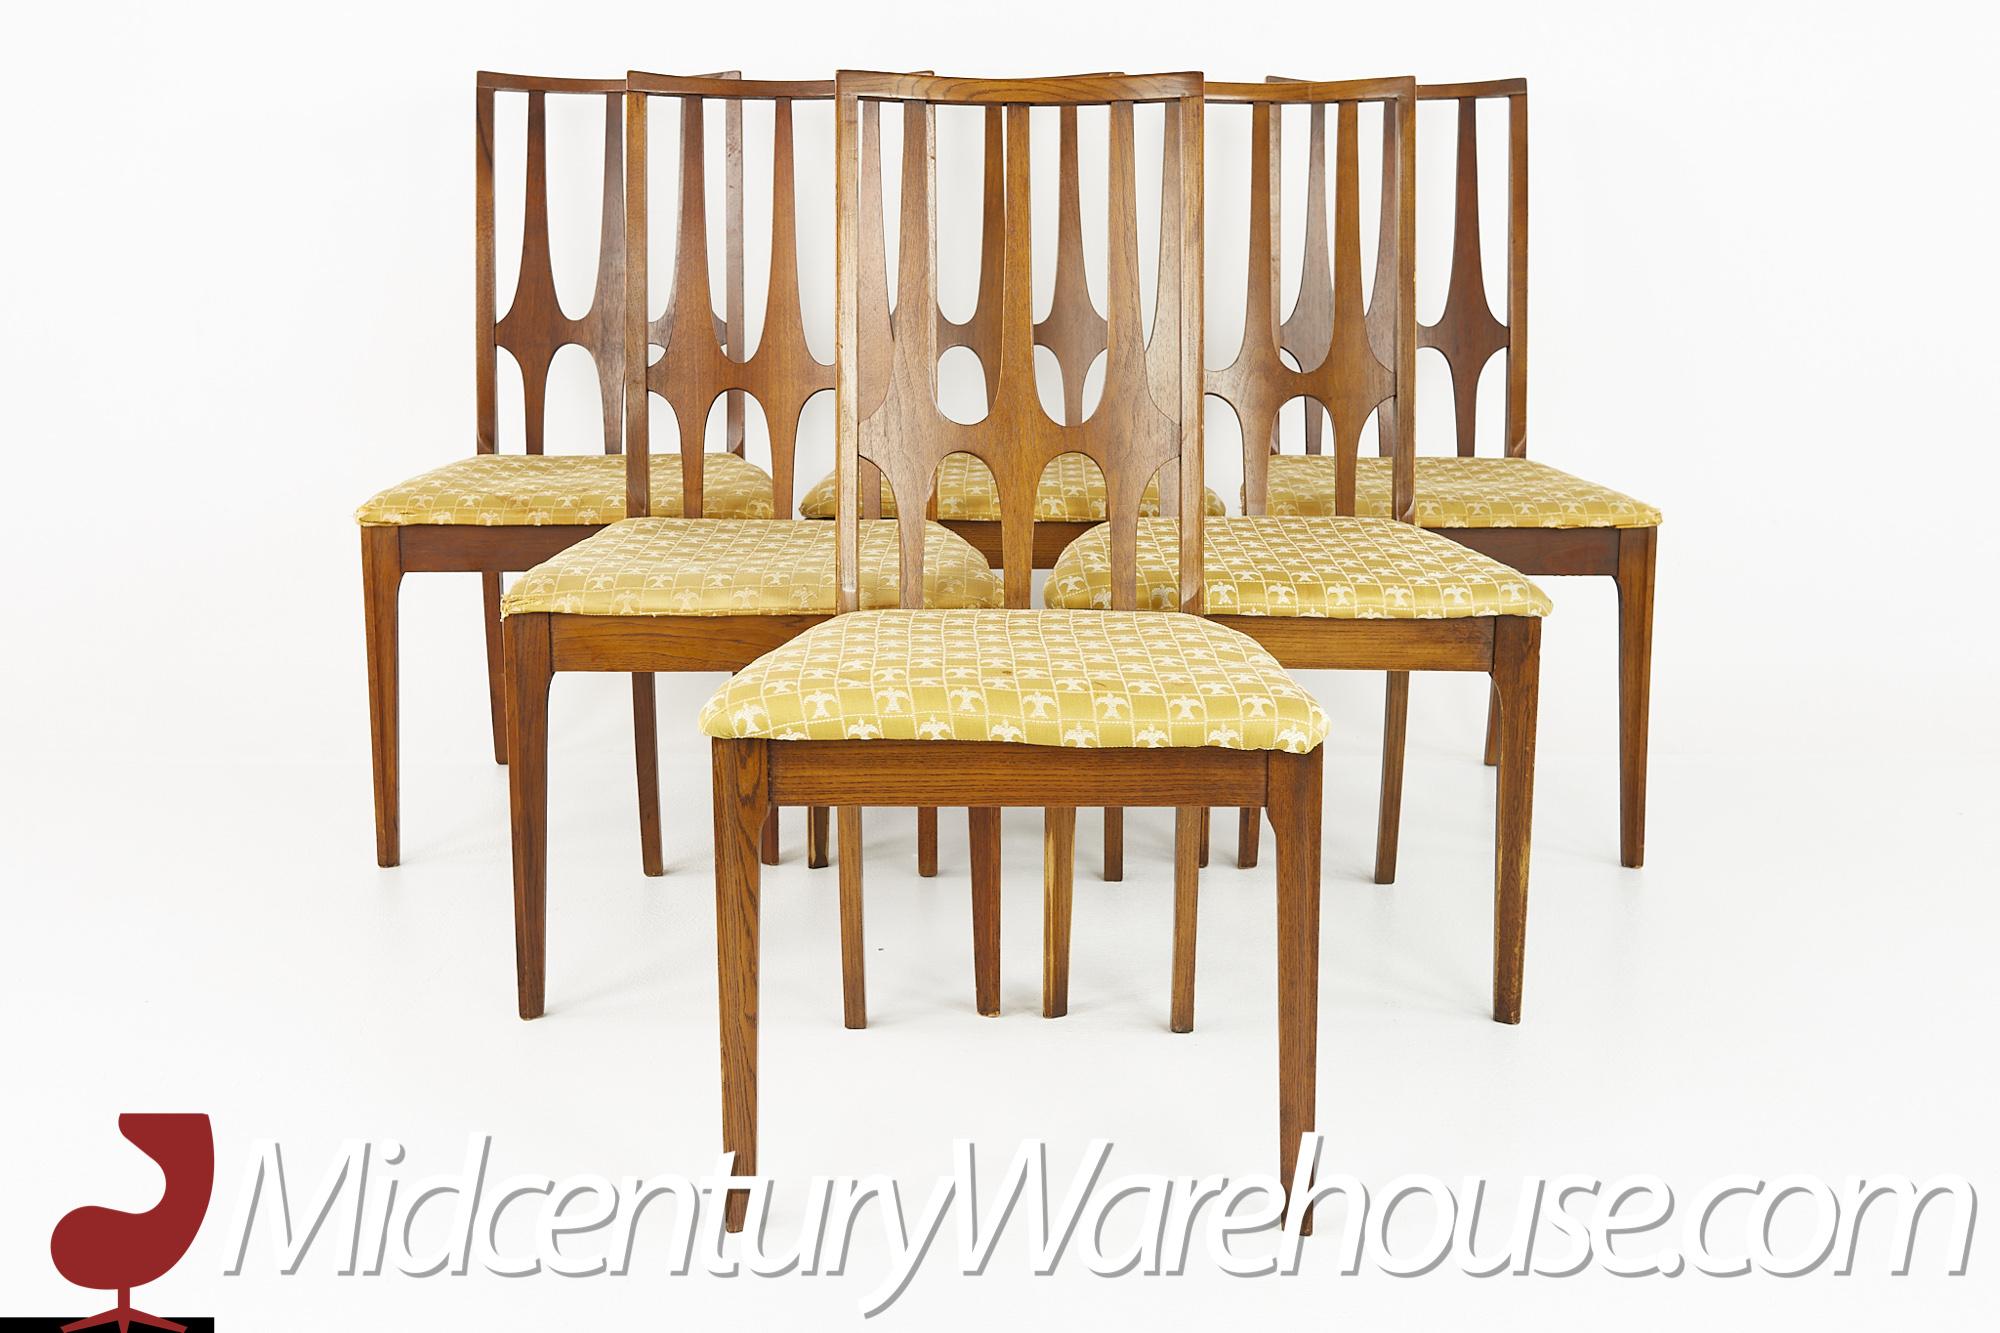 Broyhill Brasilia mid century walnut dining chairs - set of 6

Each chair measures 20 wide x 22.25 deep x 38 high with a seat height of 18 inches

?All pieces of furniture can be had in what we call restored vintage condition. That means the